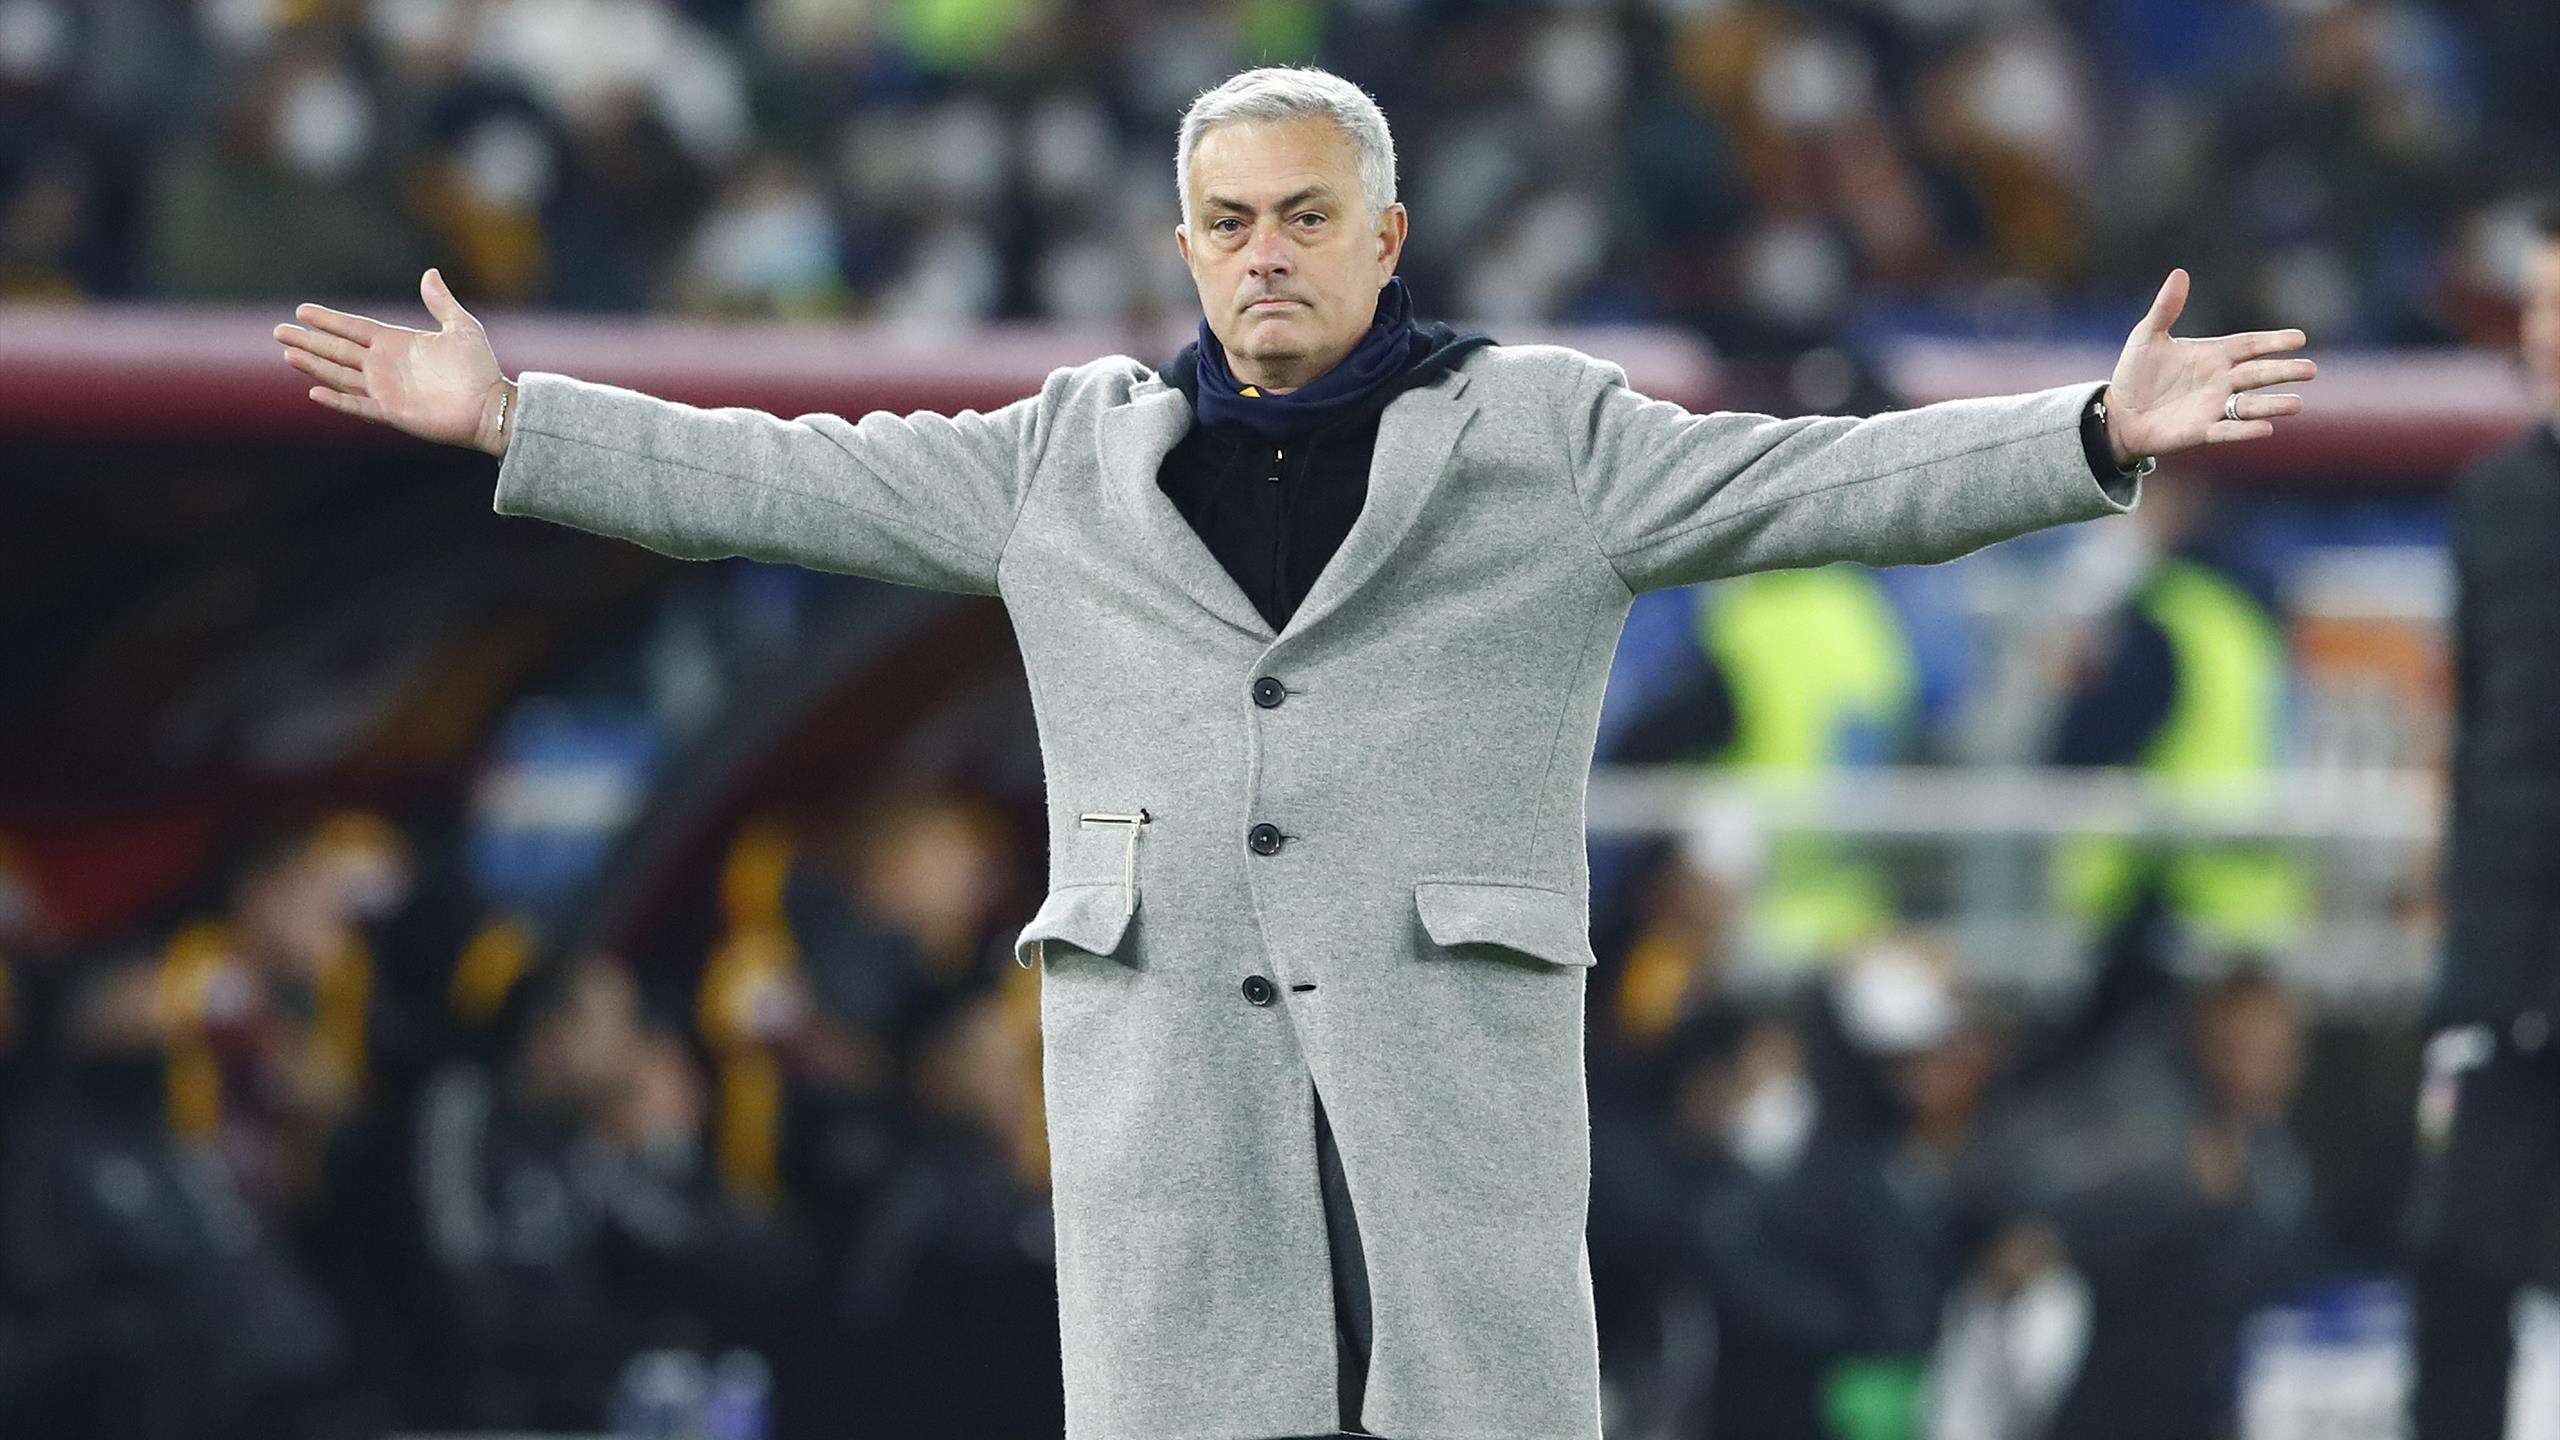 Jose Mourinho is being considered as Everton's next manager - Football News